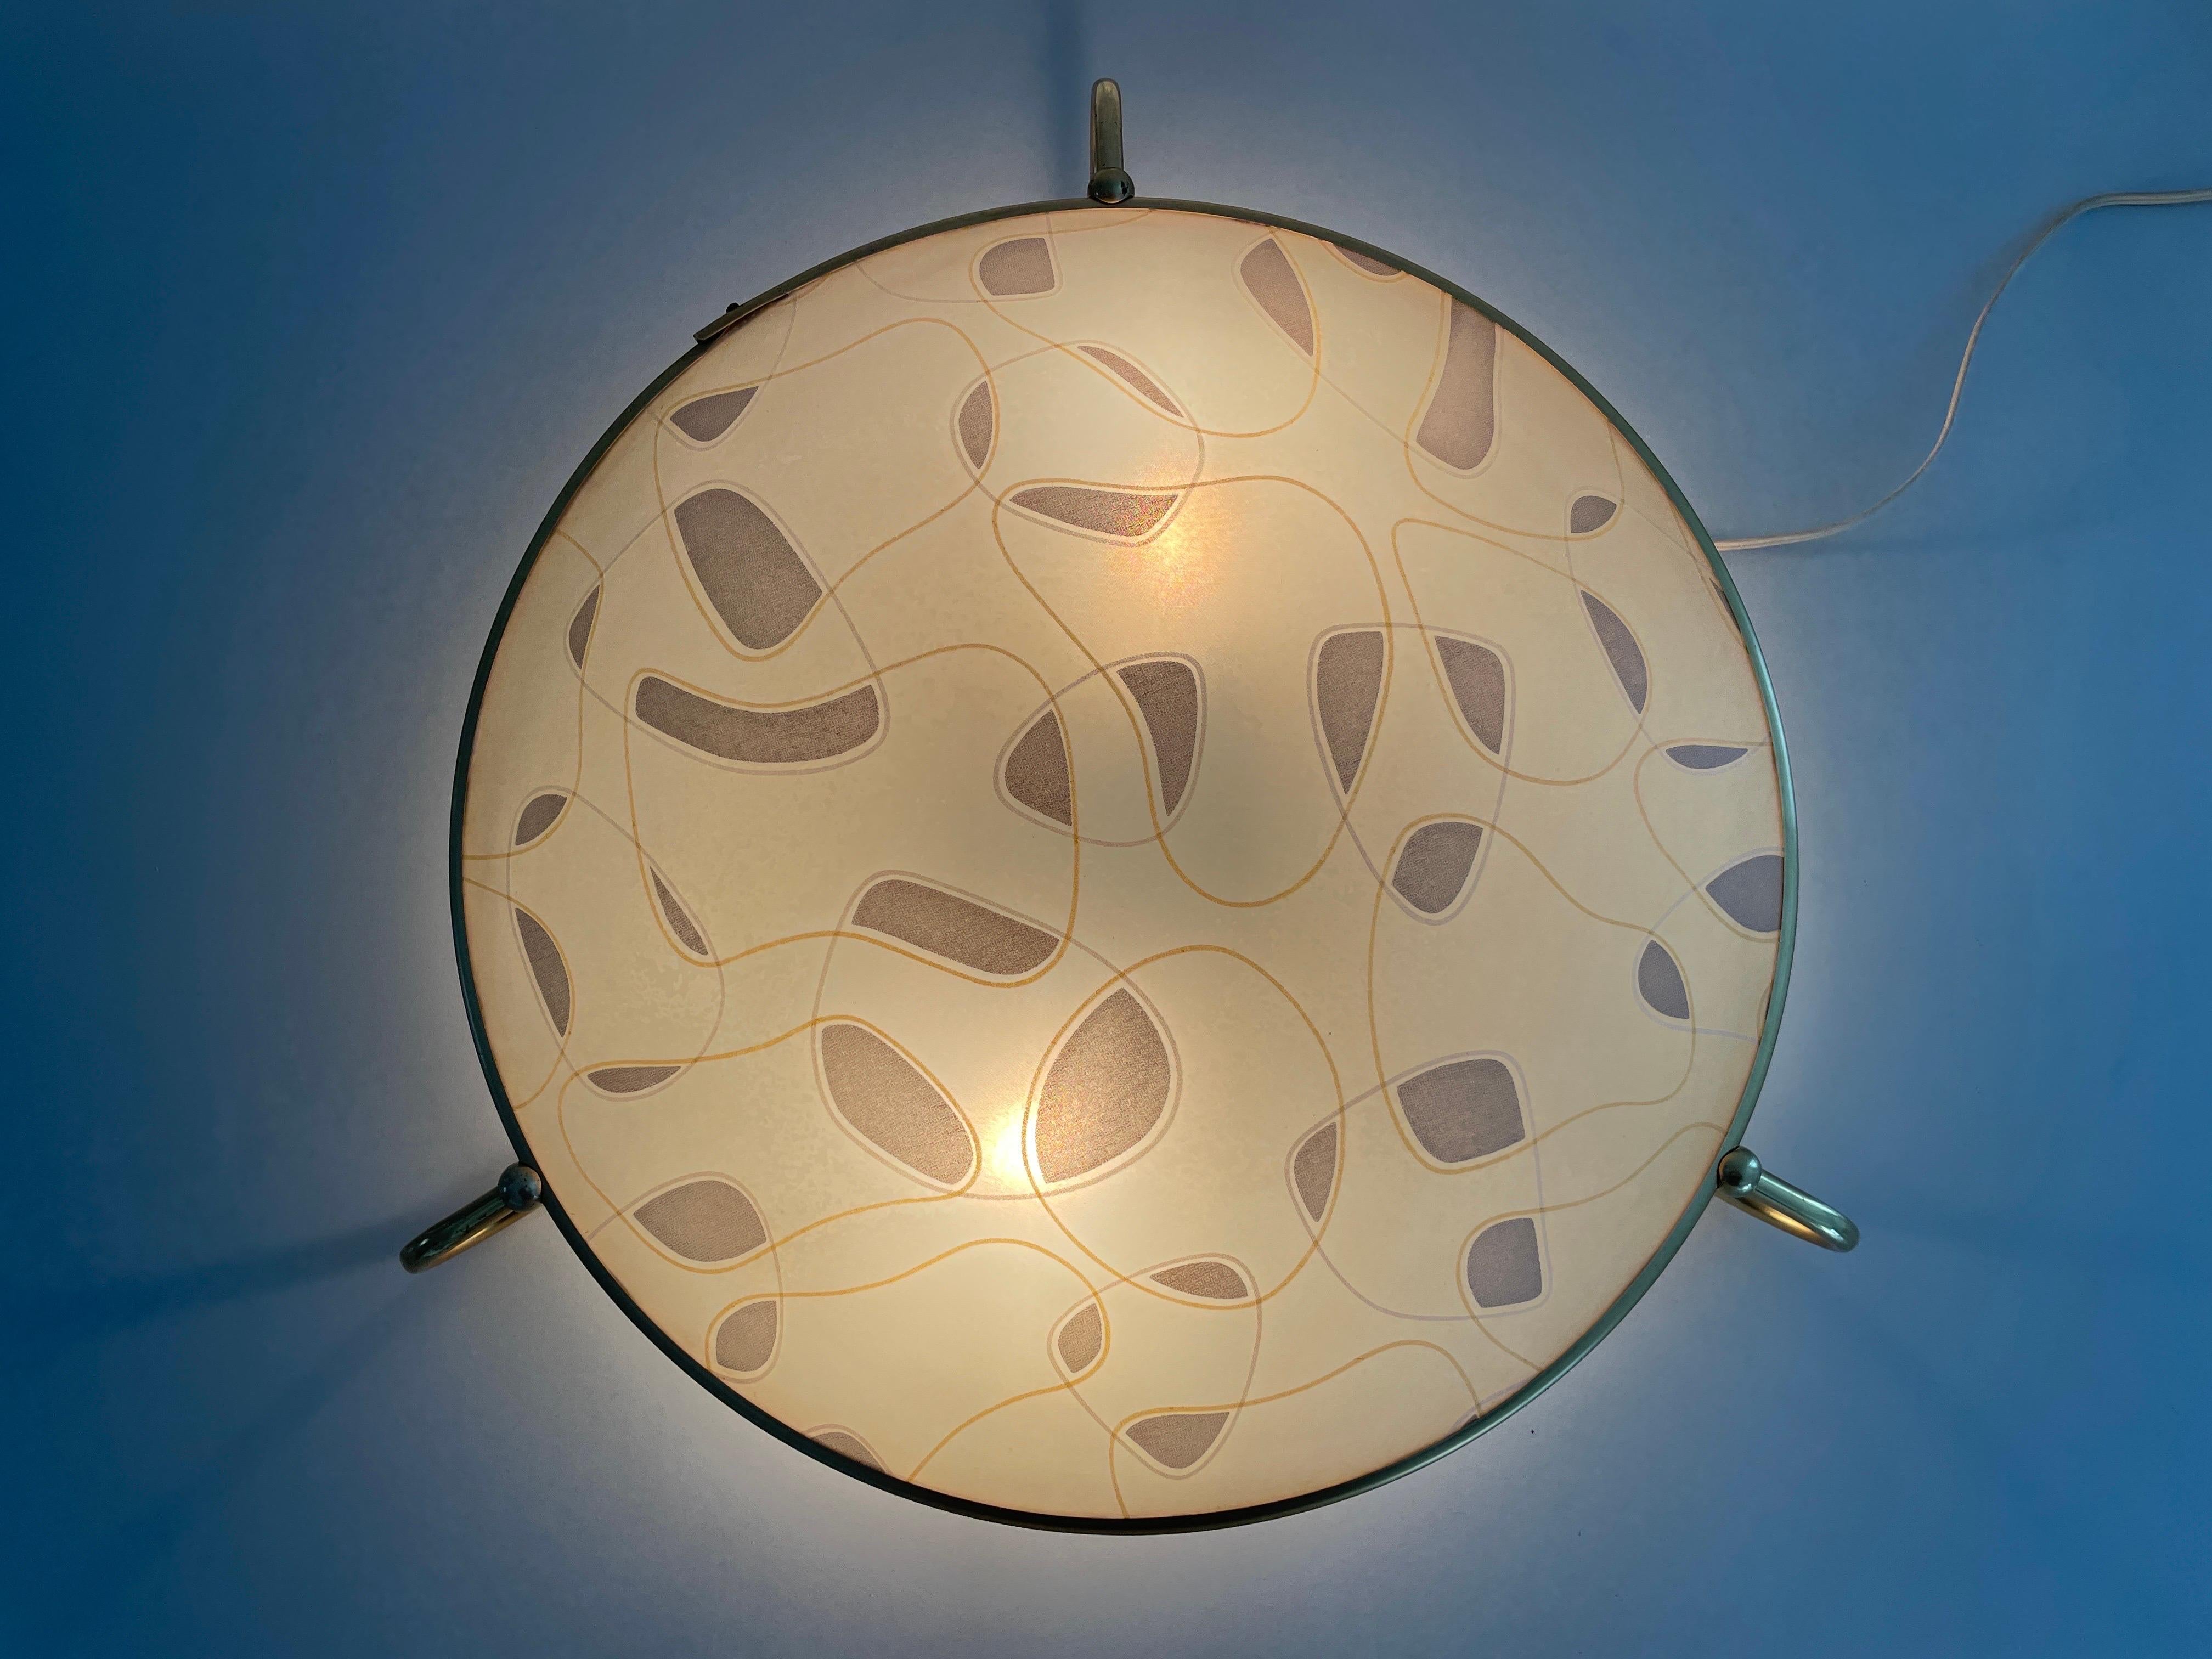 Mid-Century Modern Large Flush Mount or Ceiling Lamp by Erco, 1950s, Germany For Sale 6